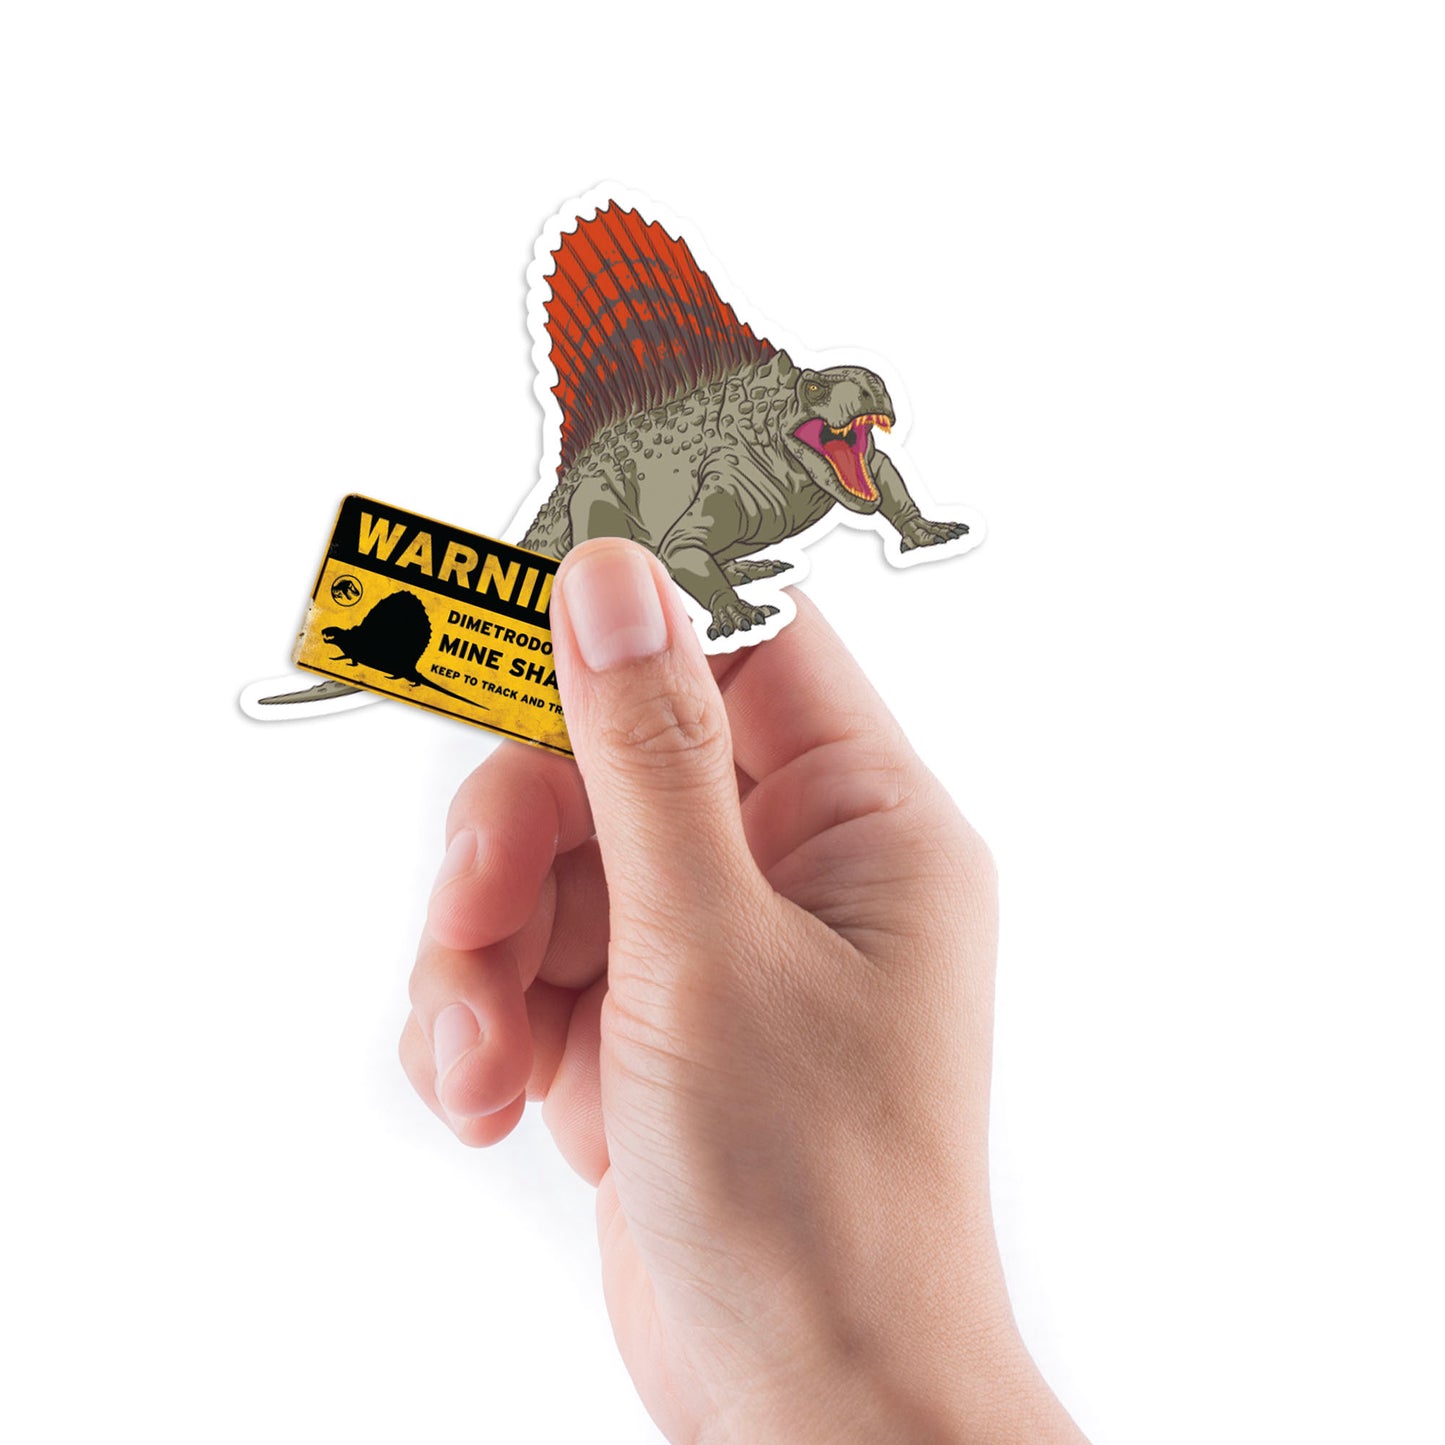 Sheet of 5 -Jurassic World Dominion: Dimetrodon Minis - Officially Licensed NBC Universal Removable Adhesive Decal